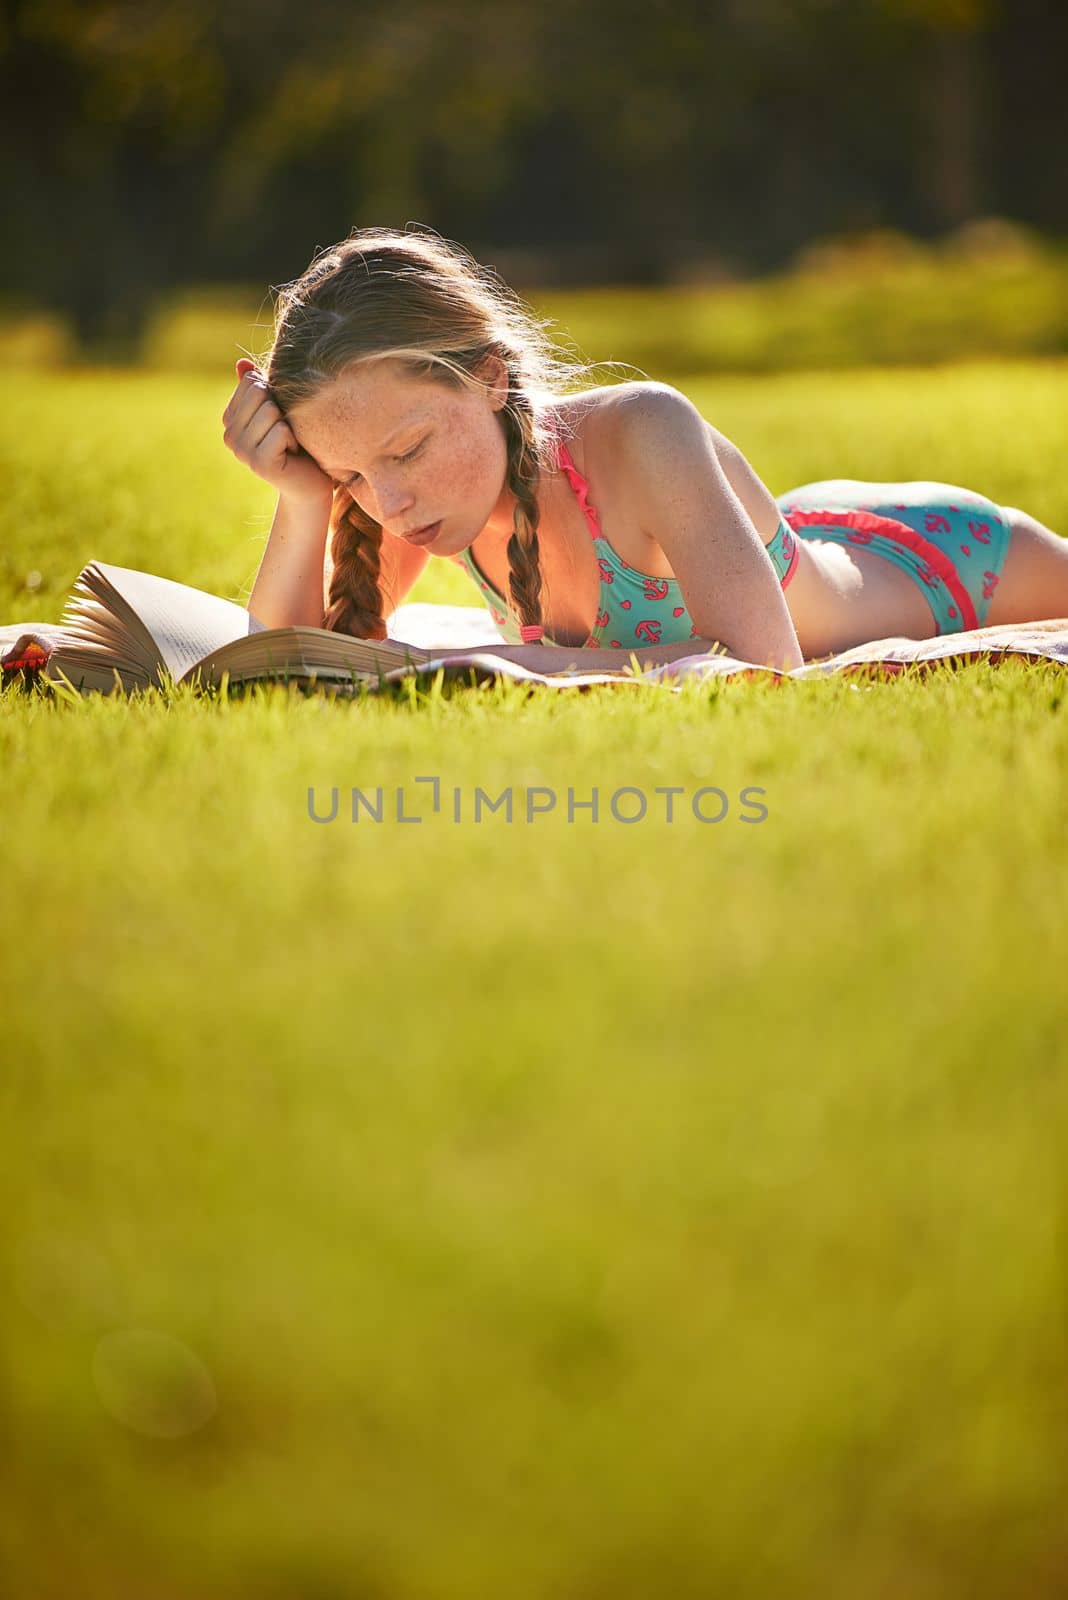 Reading in the summer sun. a young girl reading in the outdoors